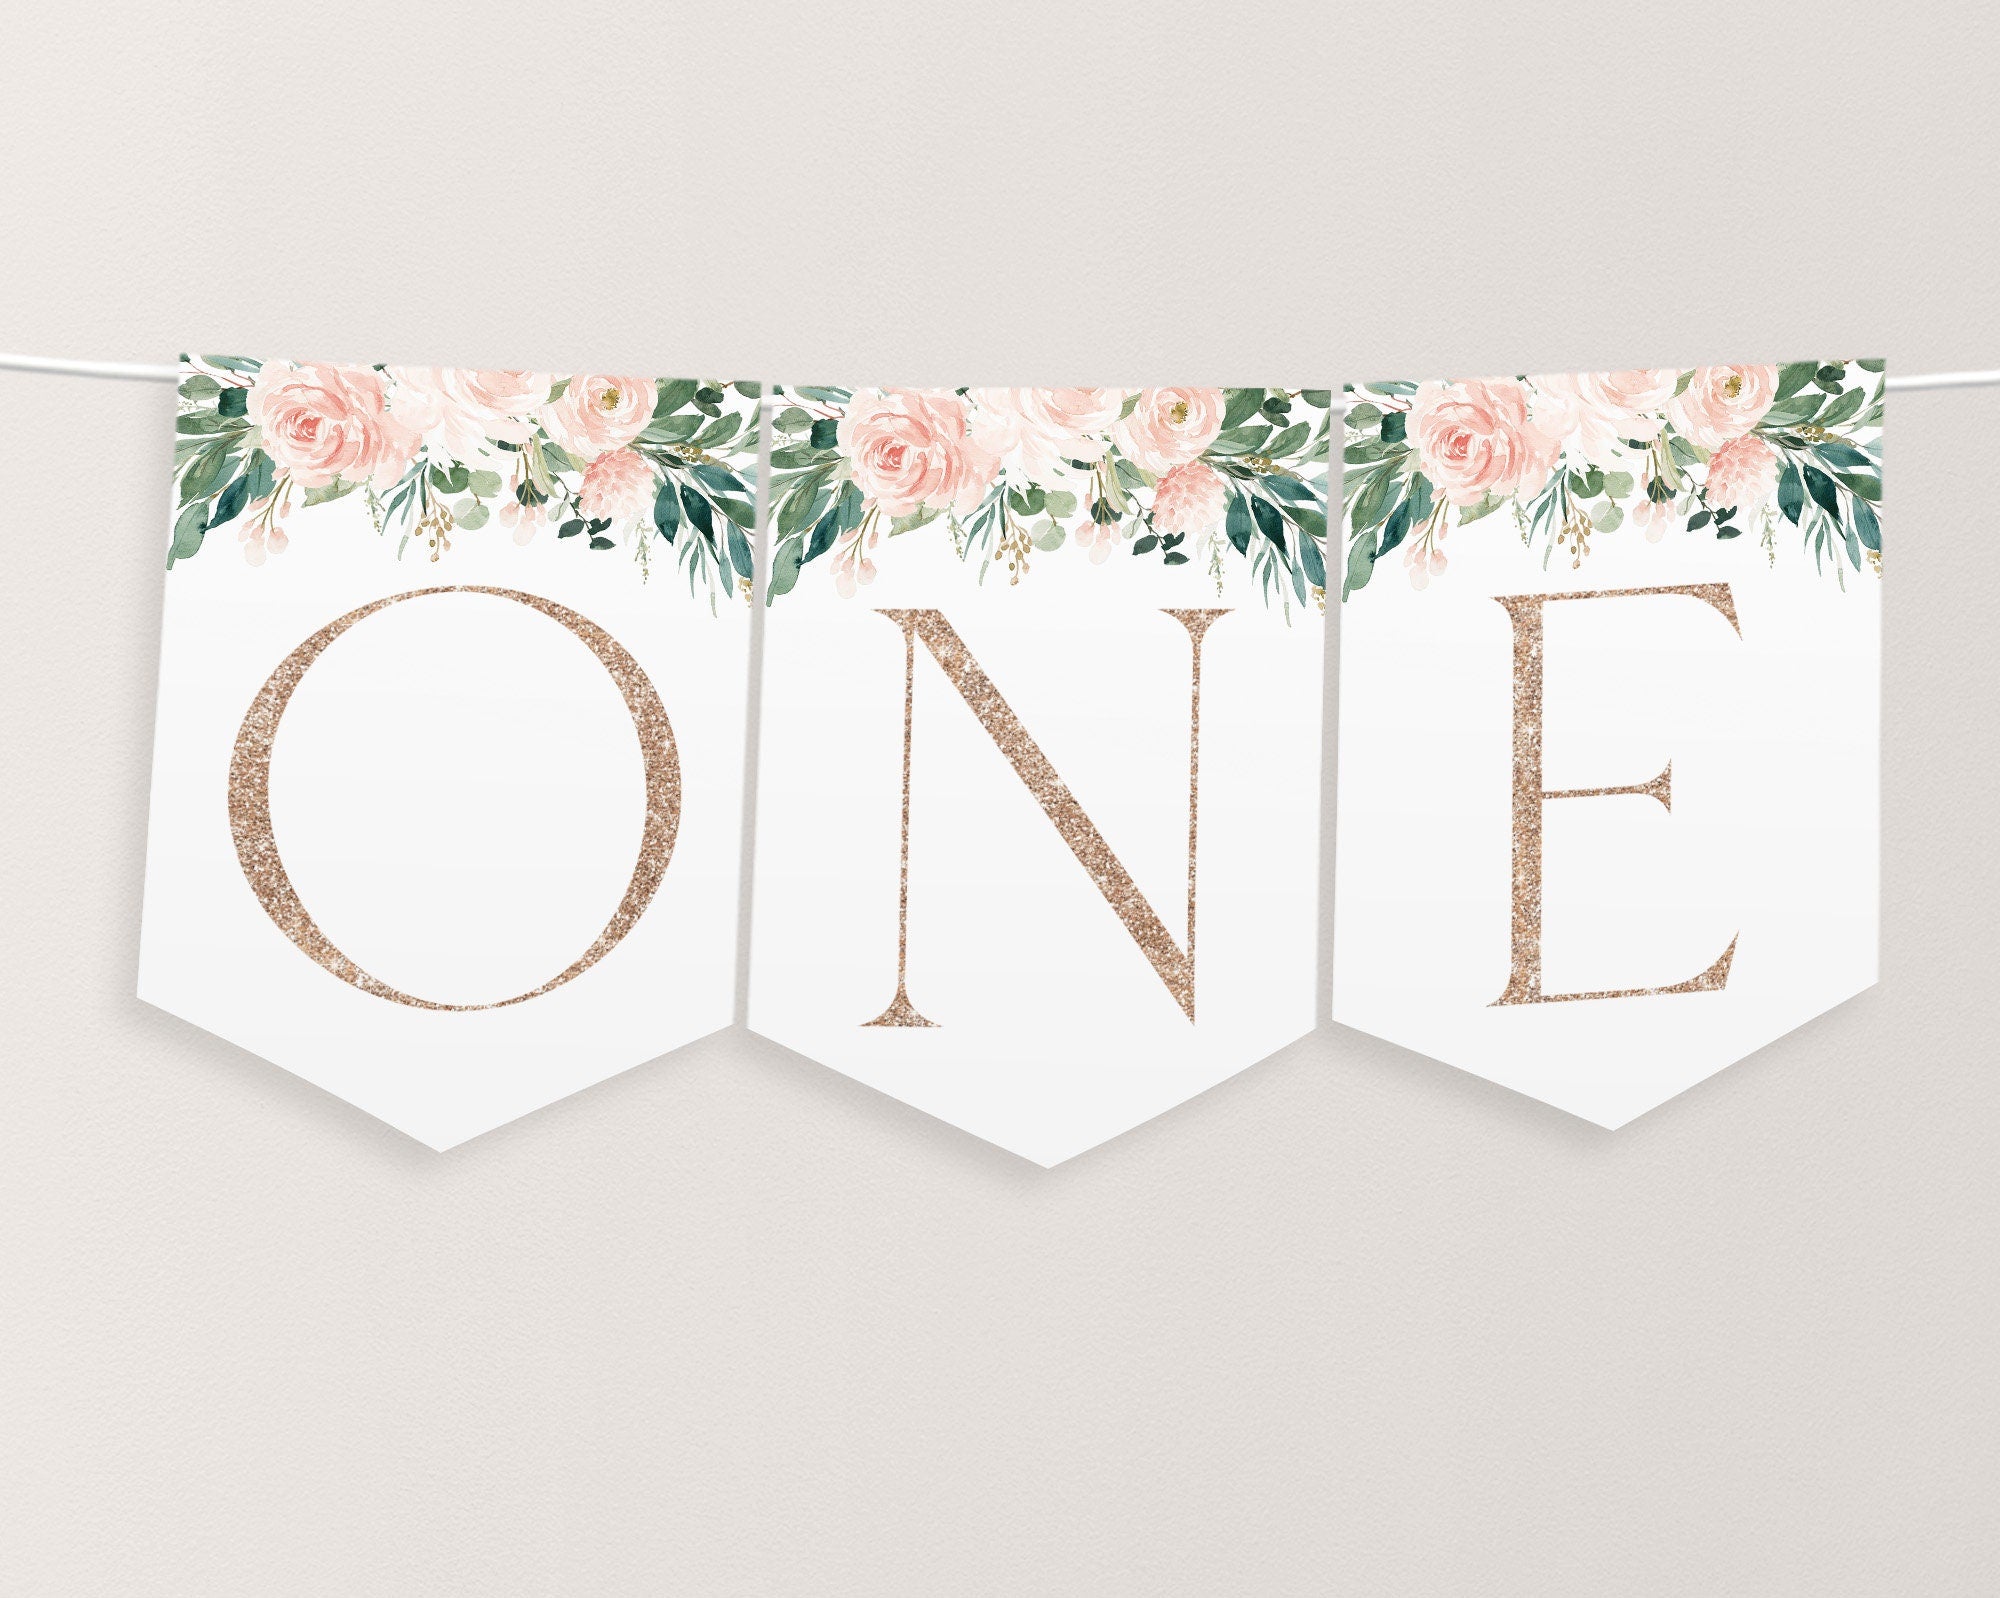 Onederful High Chair Banner Printable, 1st Birthday Banner For High Chair, Birthday Decorations, Pink Floral High Chair Banner 1st Birthday